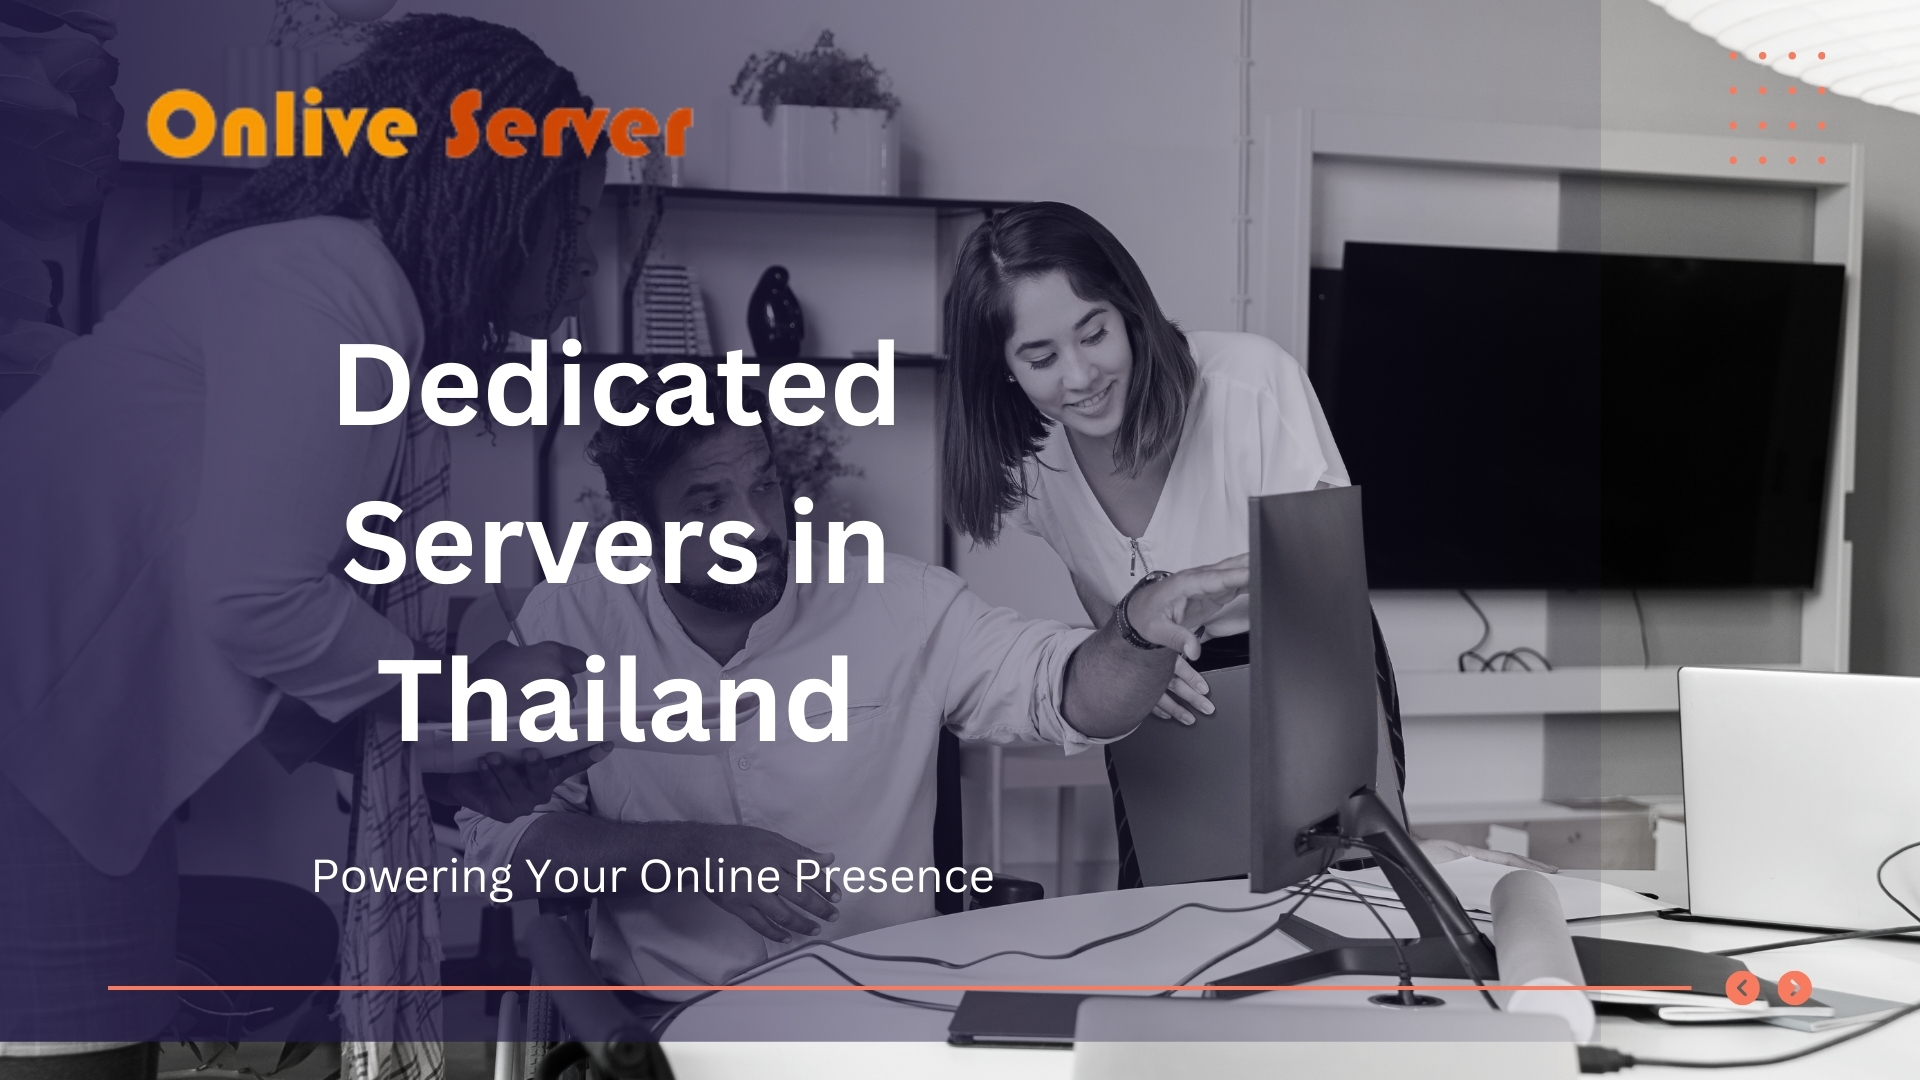 Dedicated Servers in Thailand Powering Your Online Presence